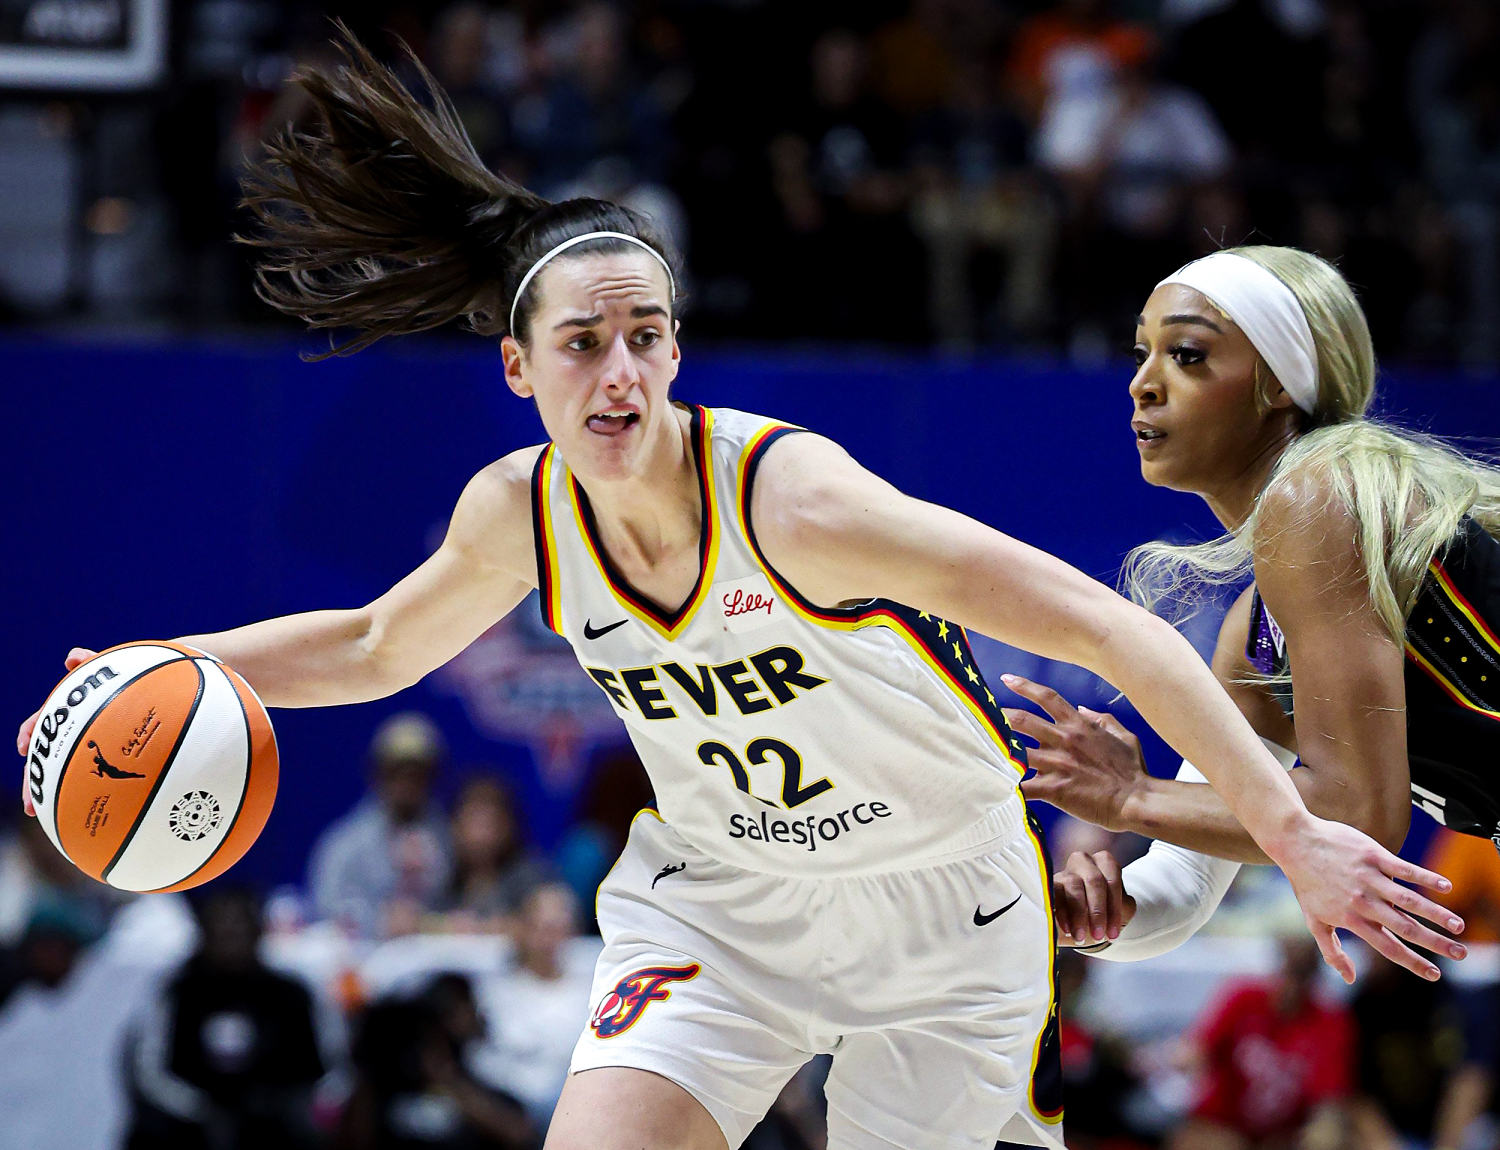 Caitlin Clark's WNBA debut is revealing — but not in the way fans think